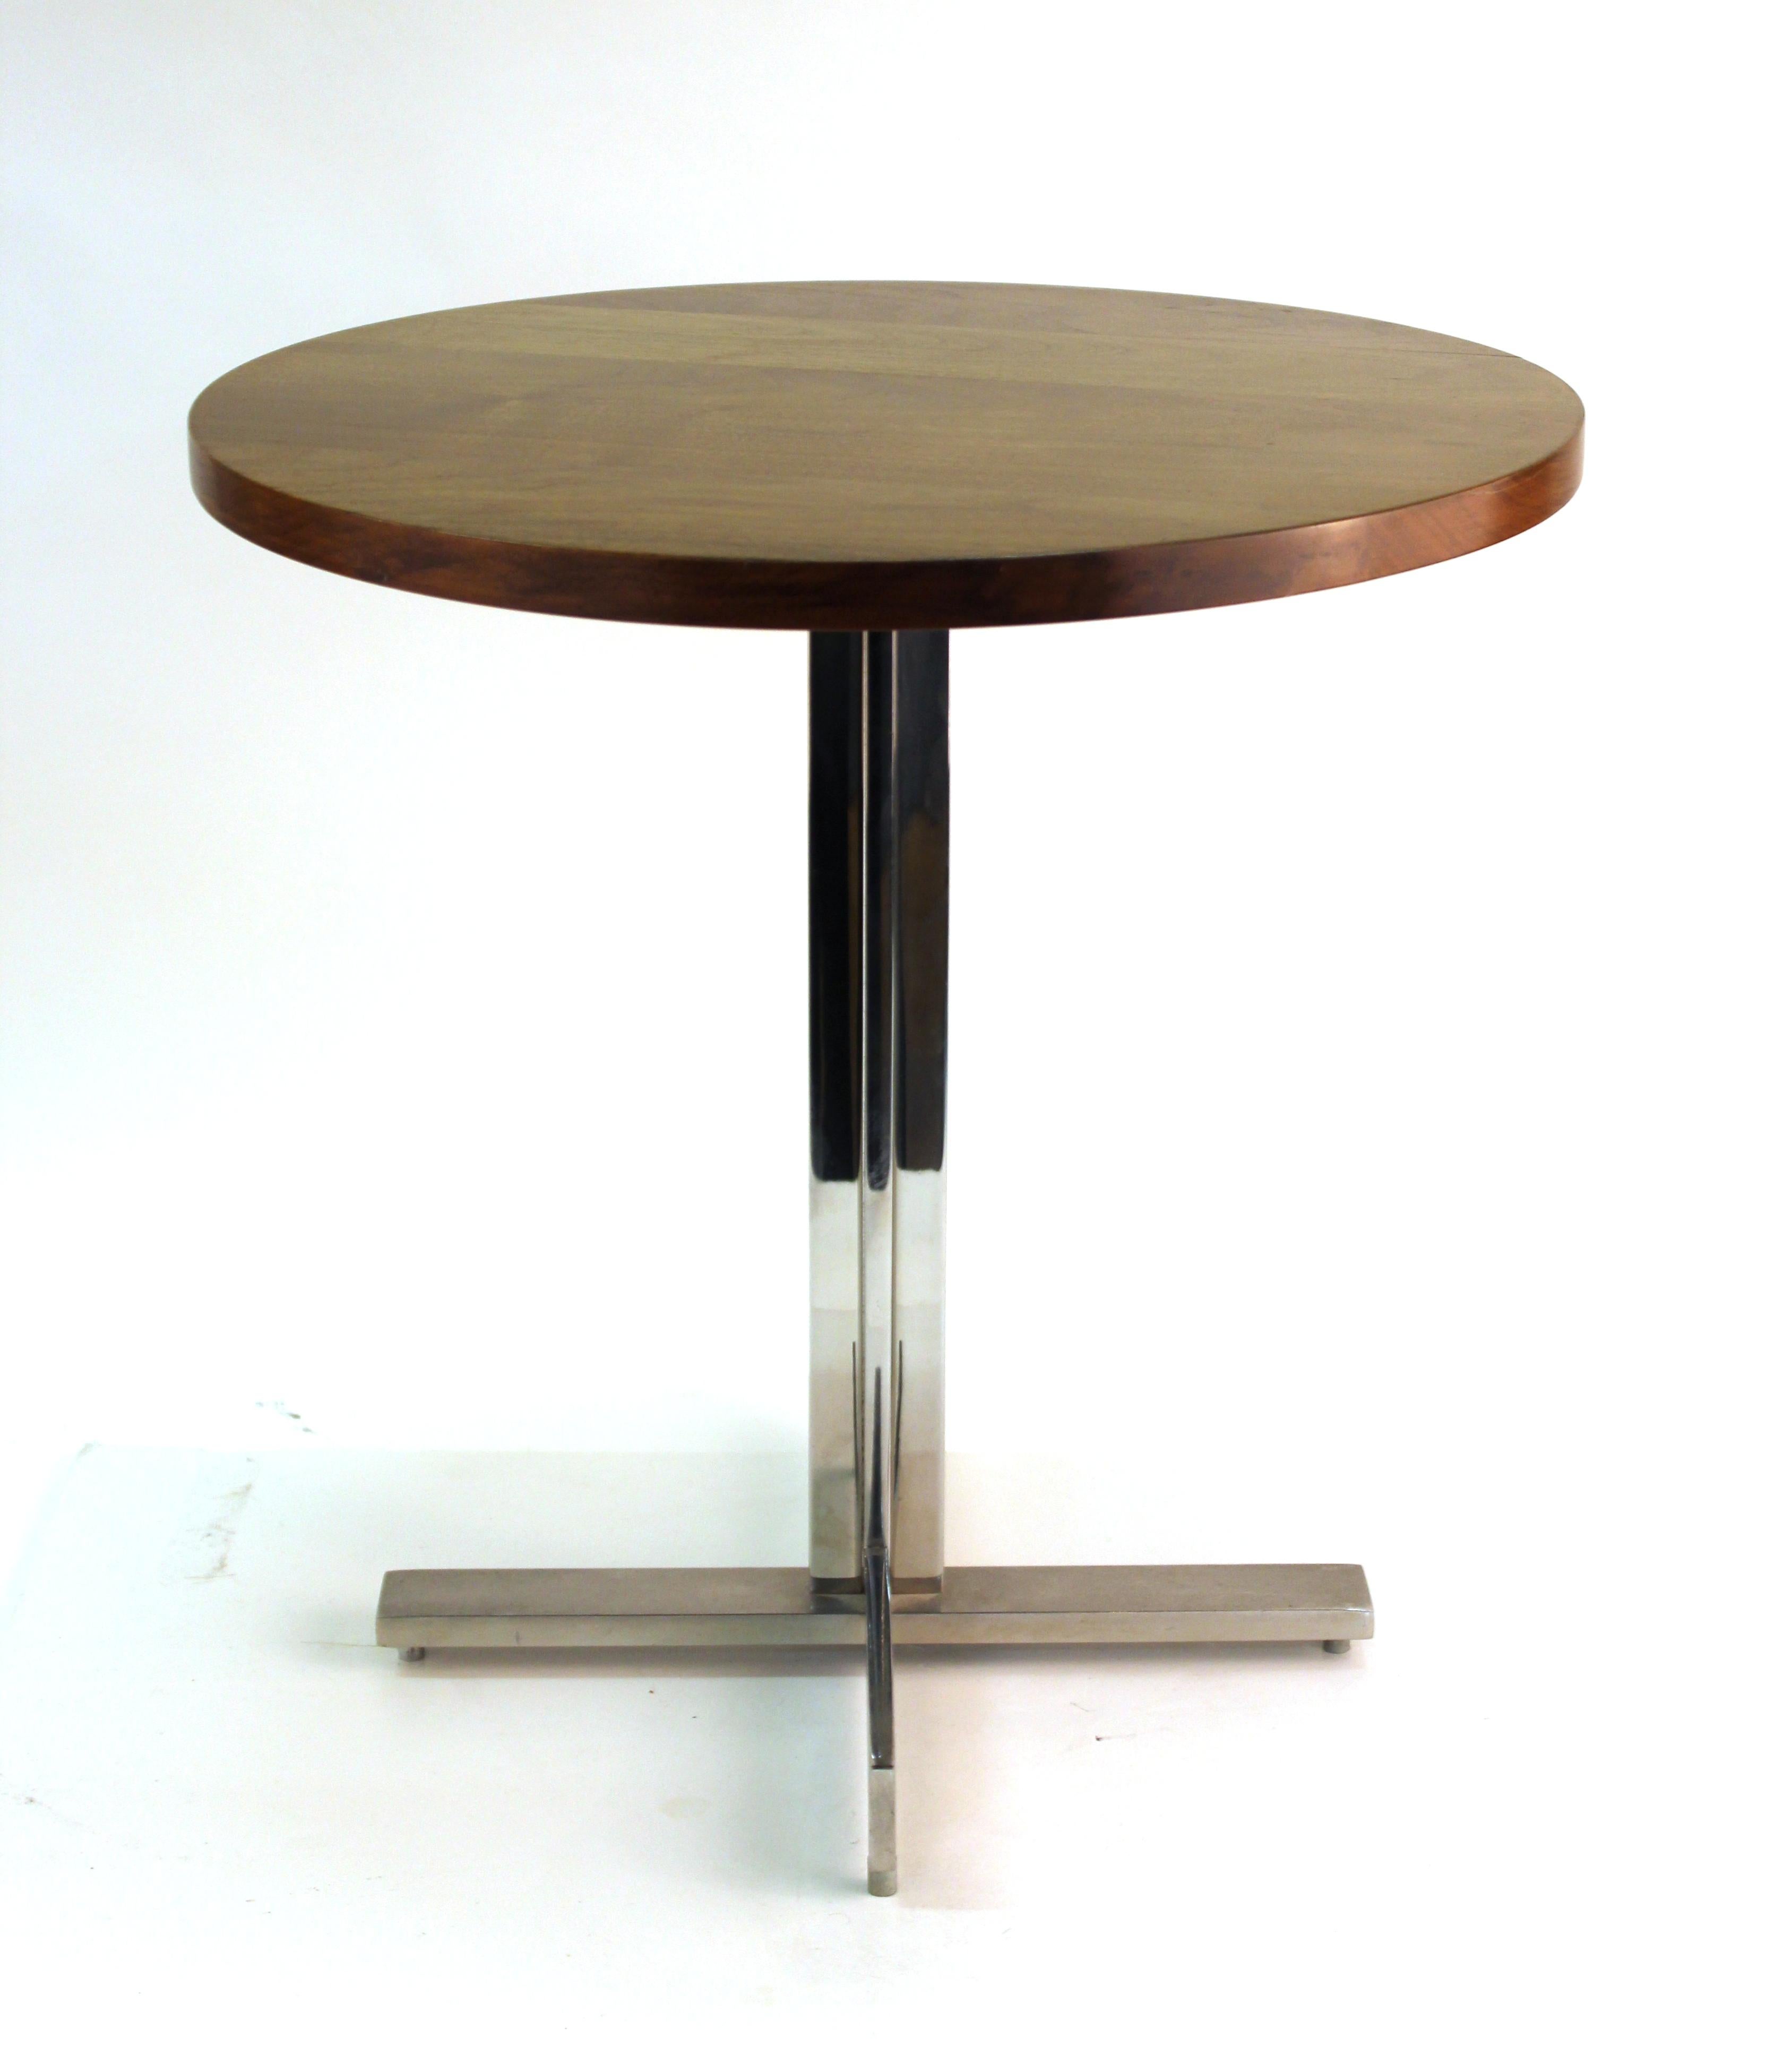 Mid-Century Modern round side table with walnut top and stainless steel base, designed in the style of Hans Eichenberger, designed in the 1960s. In great vintage condition with age-appropriate wear to the metal surfaces.